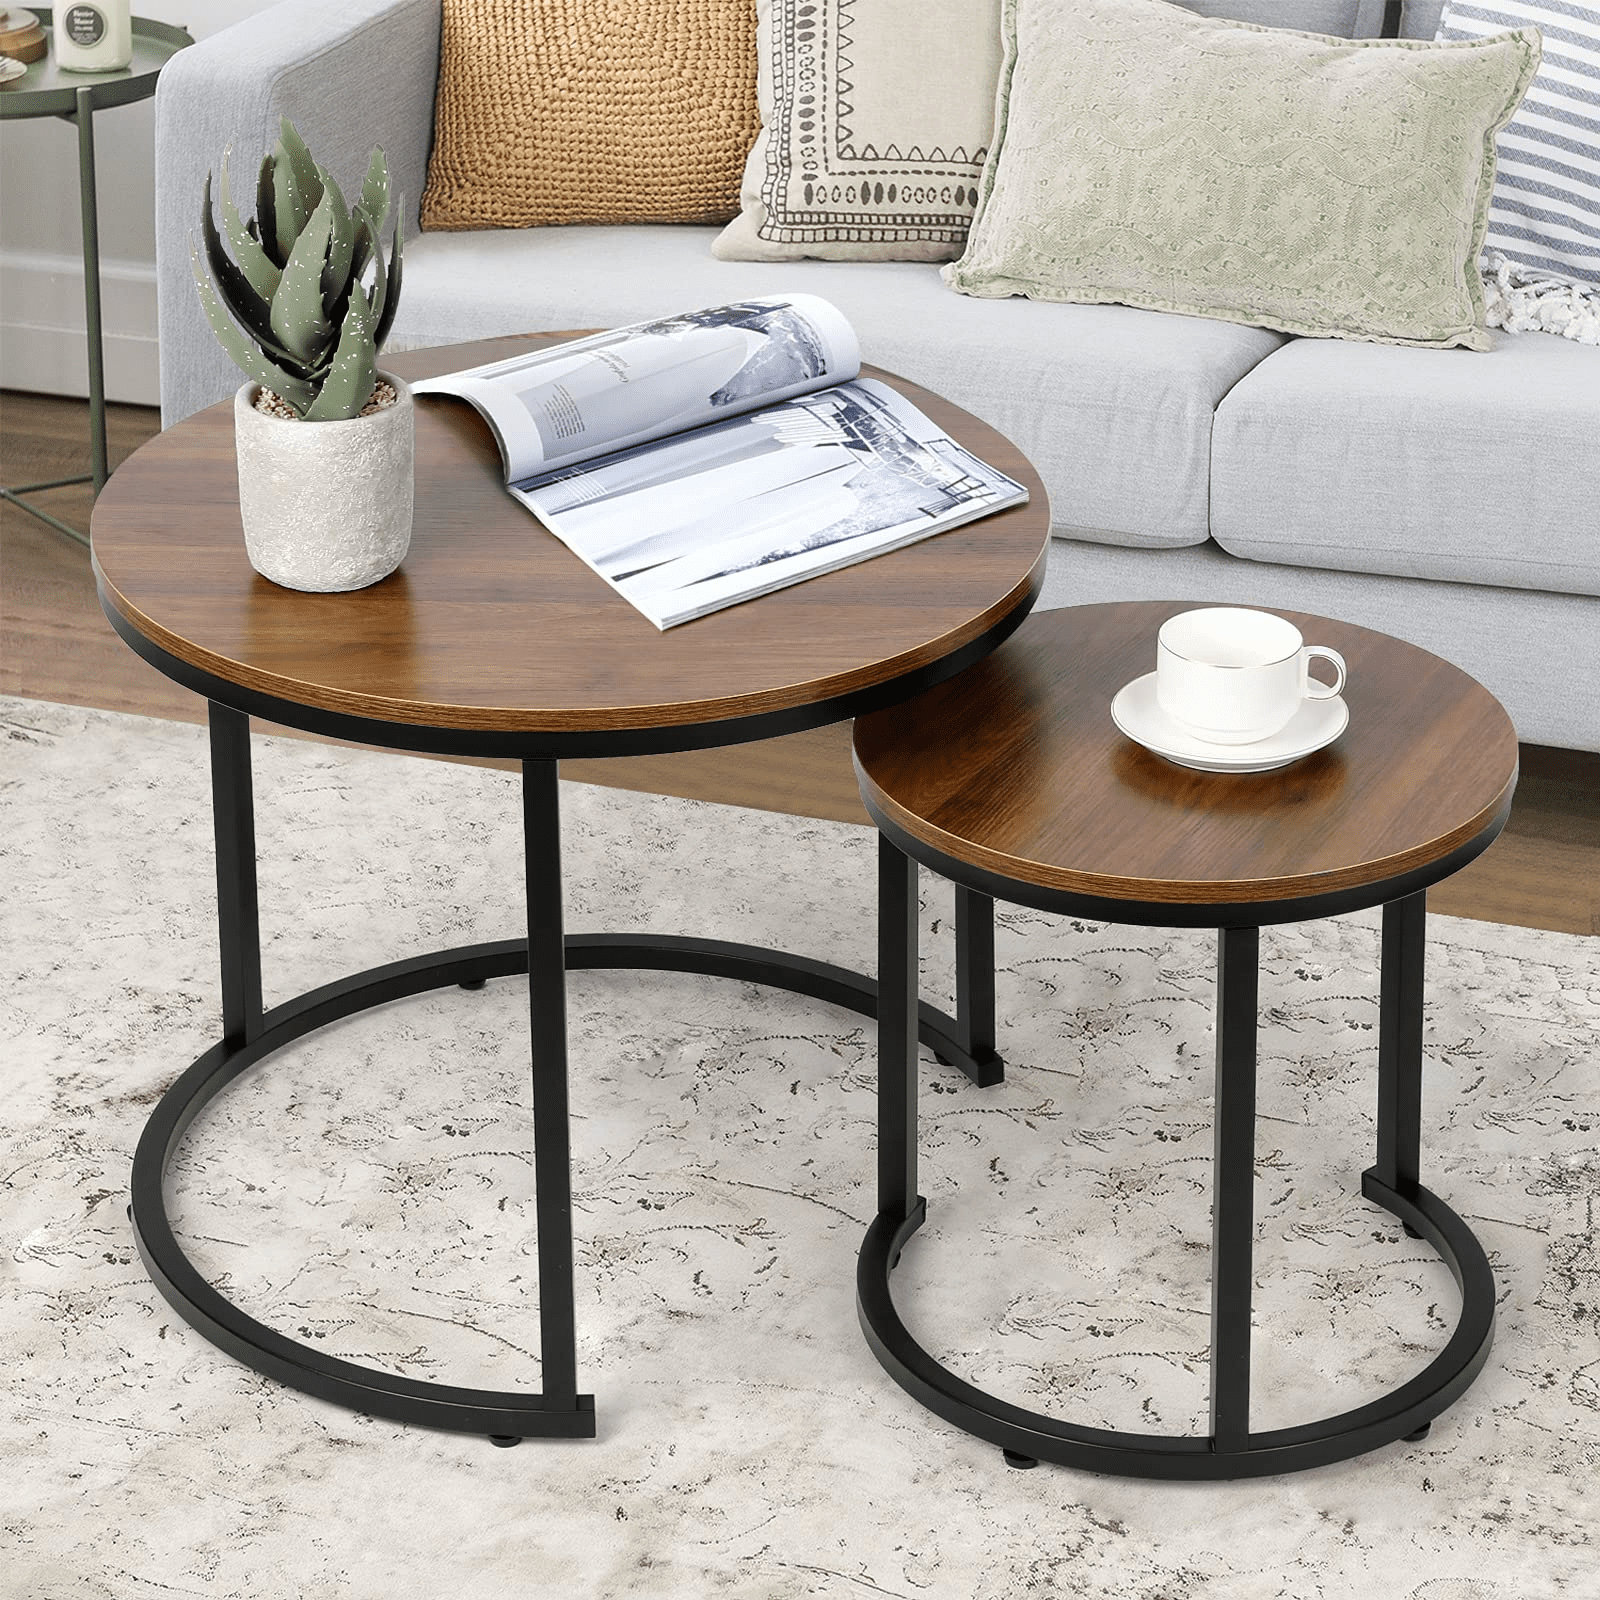 Amzdeal Modern Nesting Coffee Table Set Of 2 Walnut – Walmart With Modern Nesting Coffee Tables (View 12 of 15)